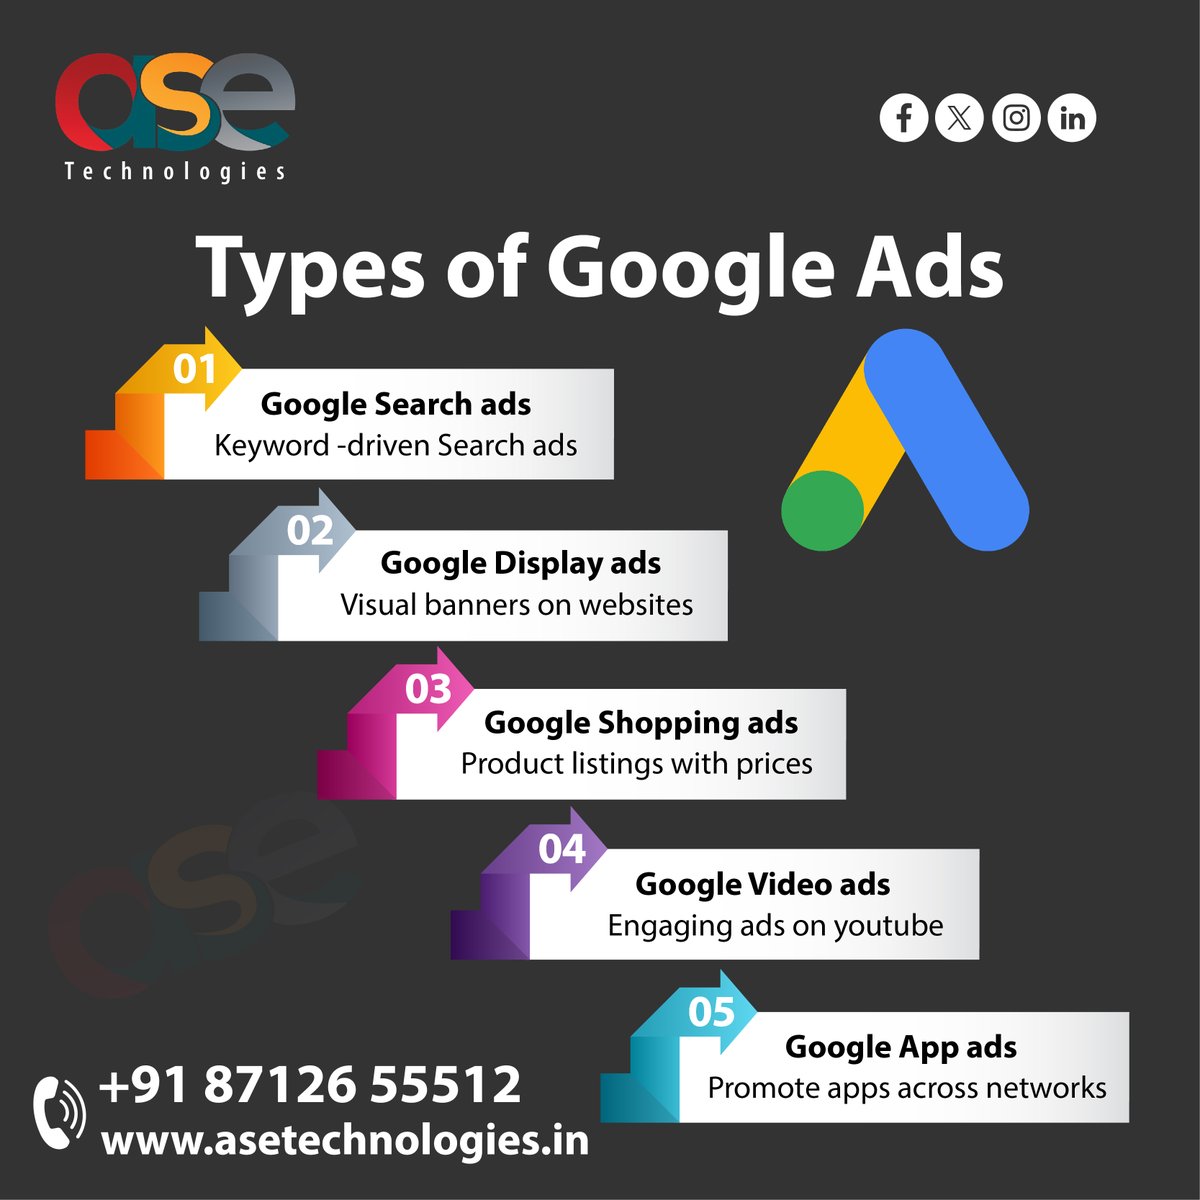 Reach Your Audience Instantly with Google Ads!

.

.

.

CALL US:+918712655512 📲

VISIT US: asetechnologies.in 🌐

#DigitalMarketing #asetechnologies #CustomerAttraction #MarketingStrategy #OnlineMarketing #visakhapatnam #DigitalStrategy #CustomerEngagement #MarketingMagic